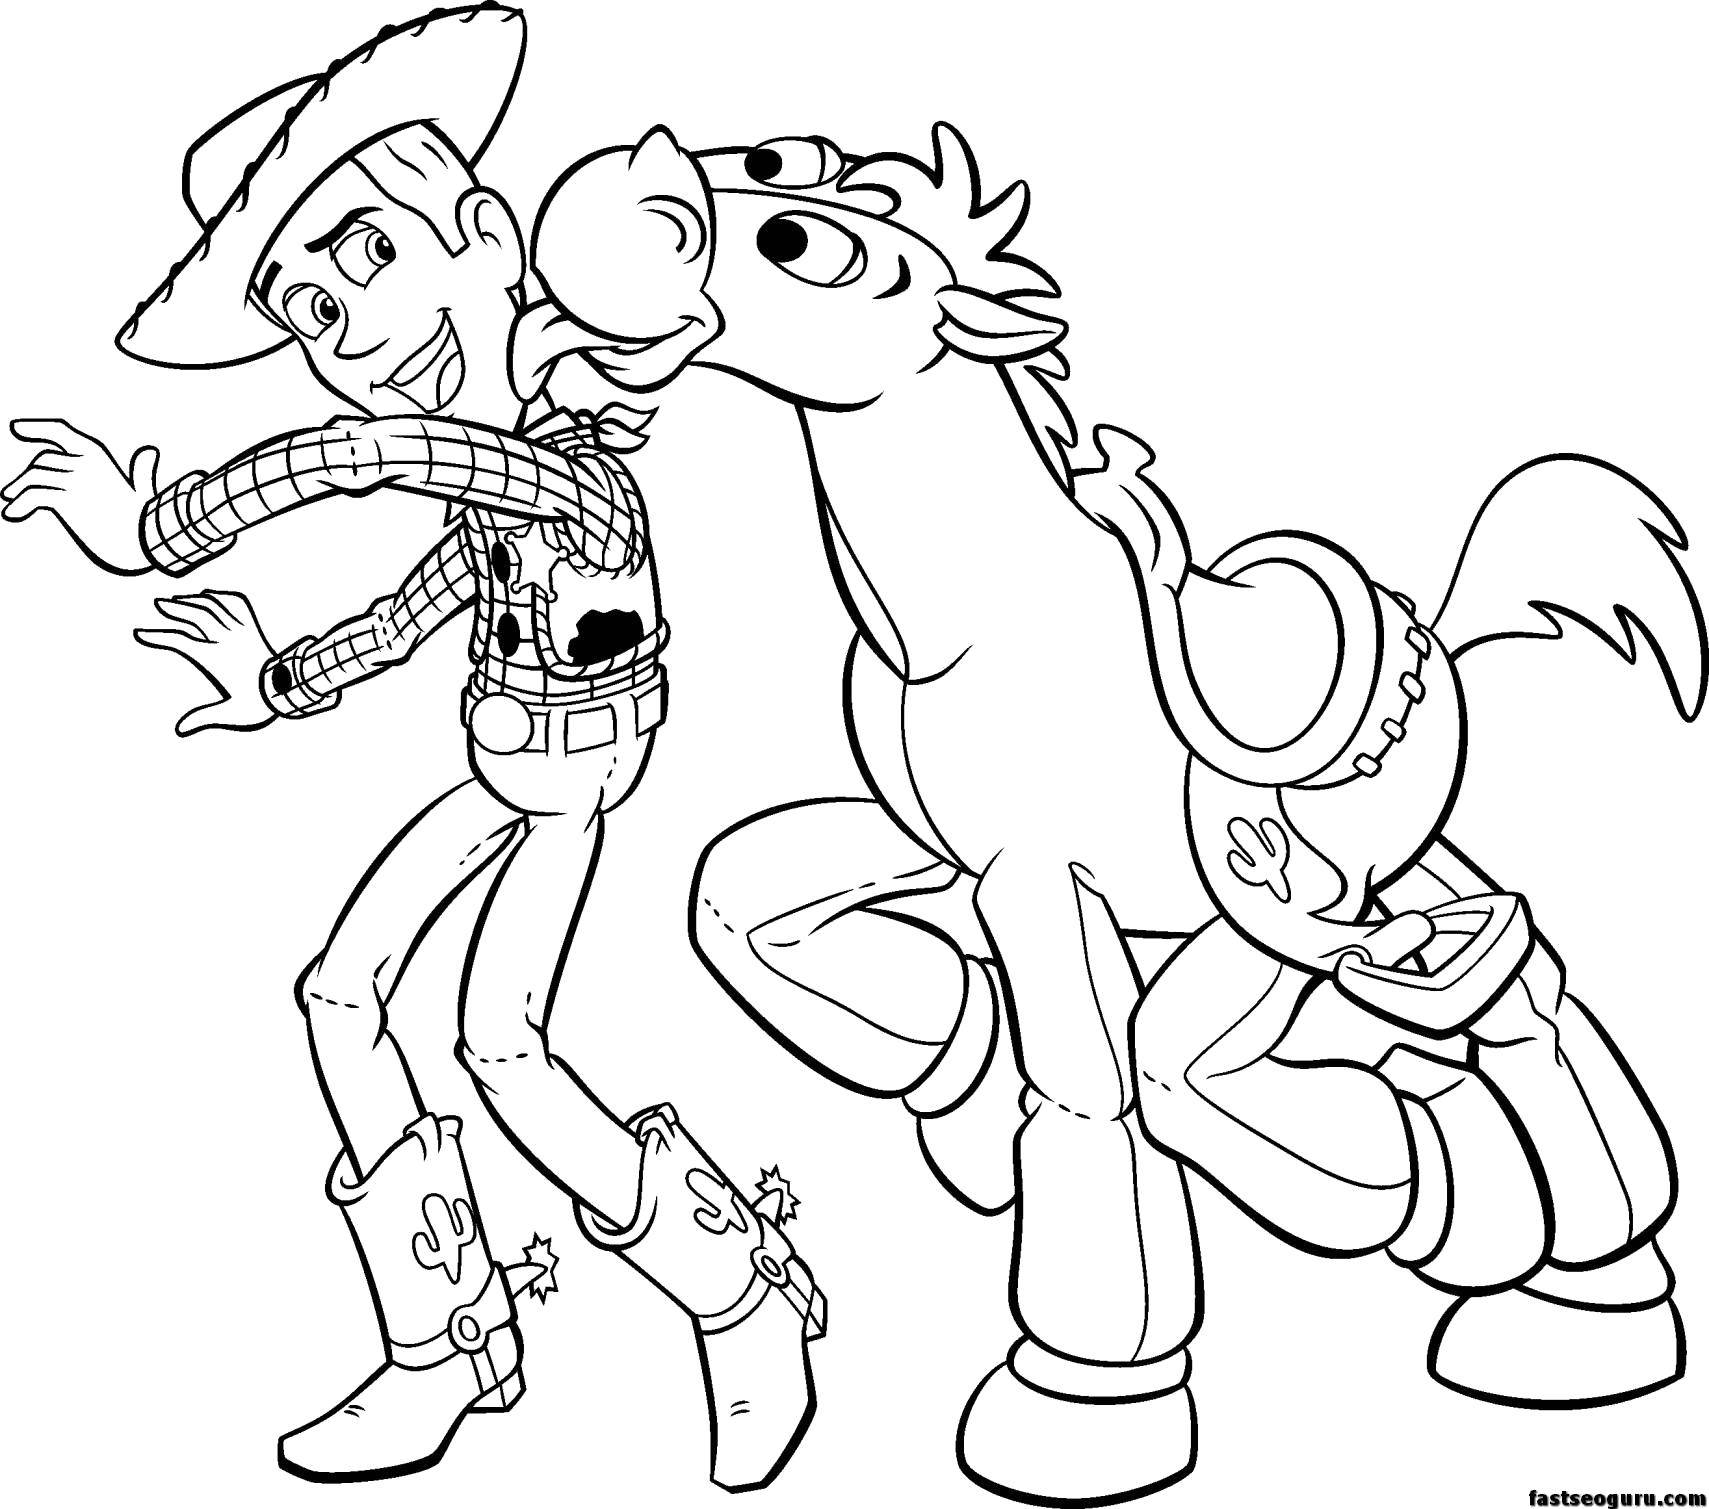 Coloring Sheriff woody horse. Category coloring. Tags:  Cartoon character, toy Story.